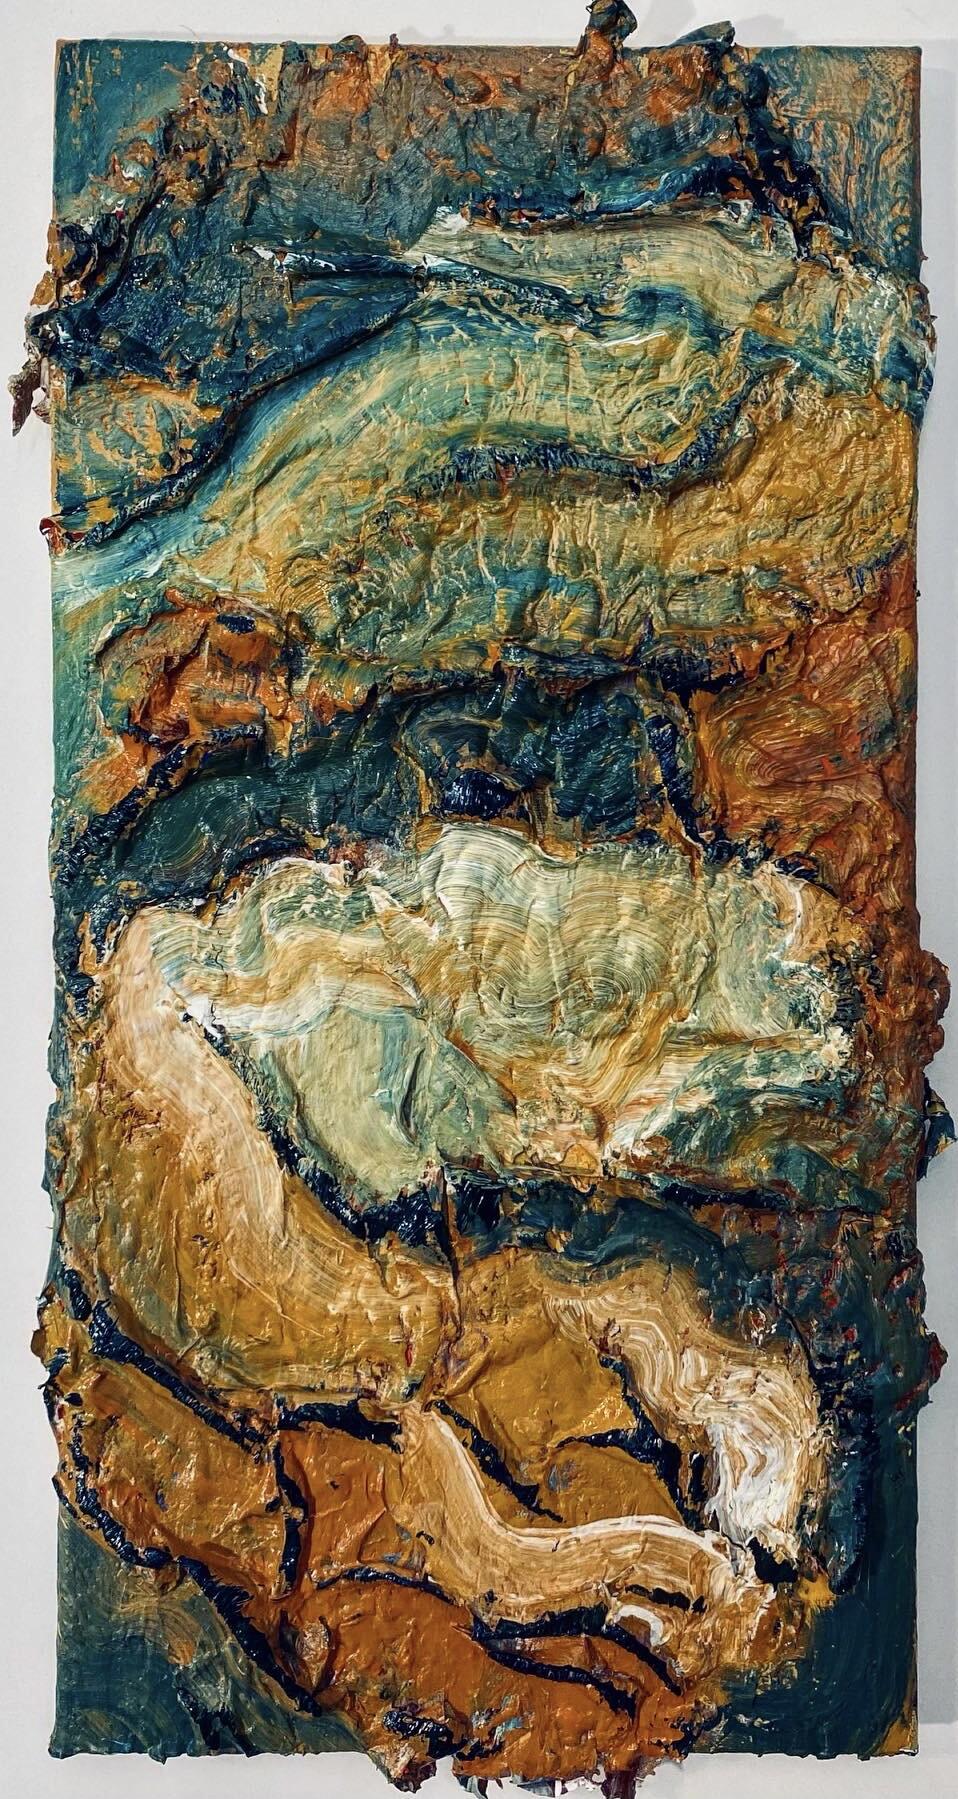 This painting was made with a sheet of acrylic paint that was dried and draped onto a canvas. The resulting surface was painted on with warmer yellow, green, and teal colors